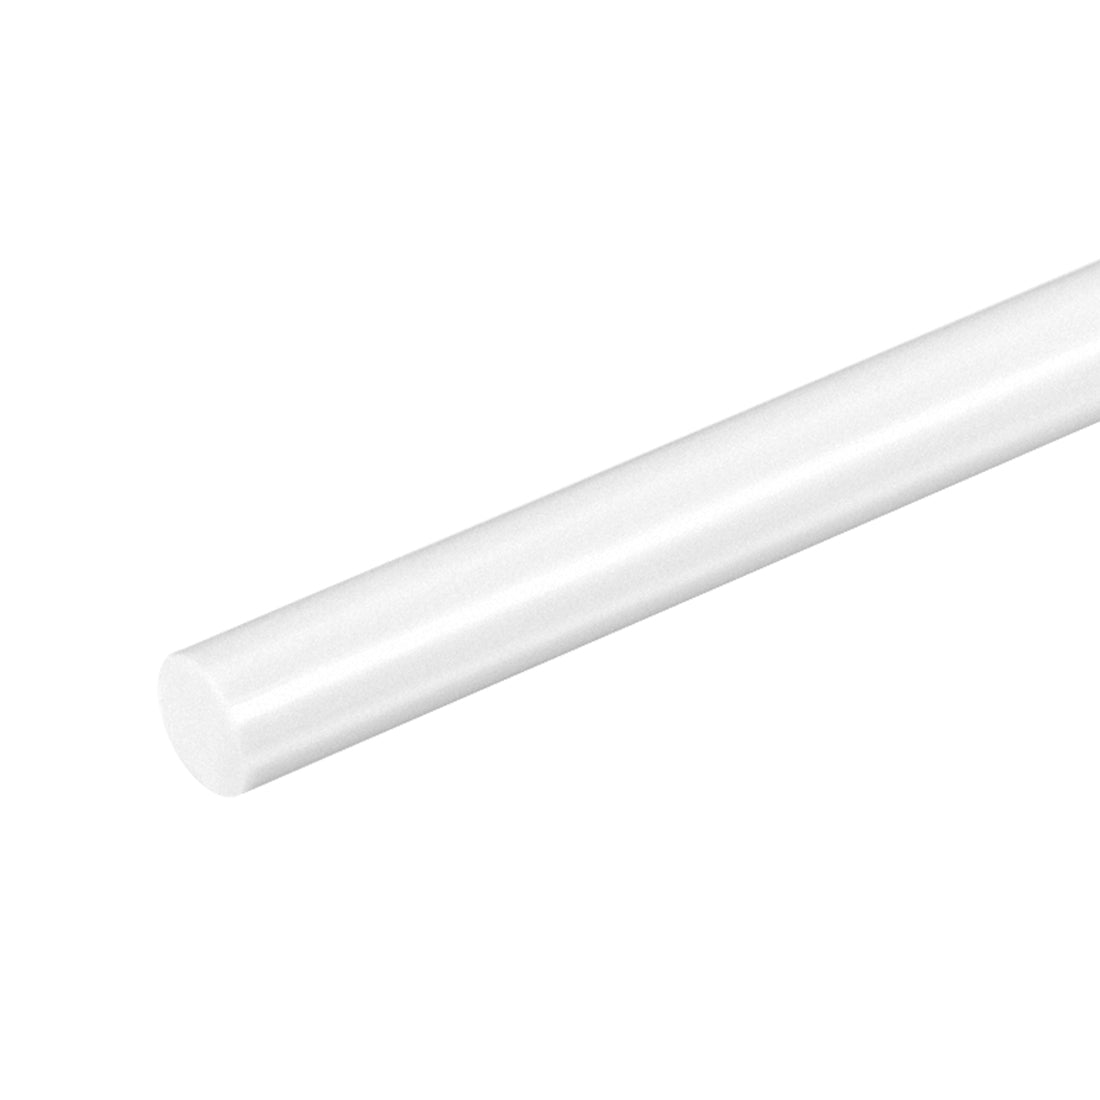 uxcell Uxcell 8mm × 20" ABS Plastic Round Bar Rod for Architectural Model Making DIY White